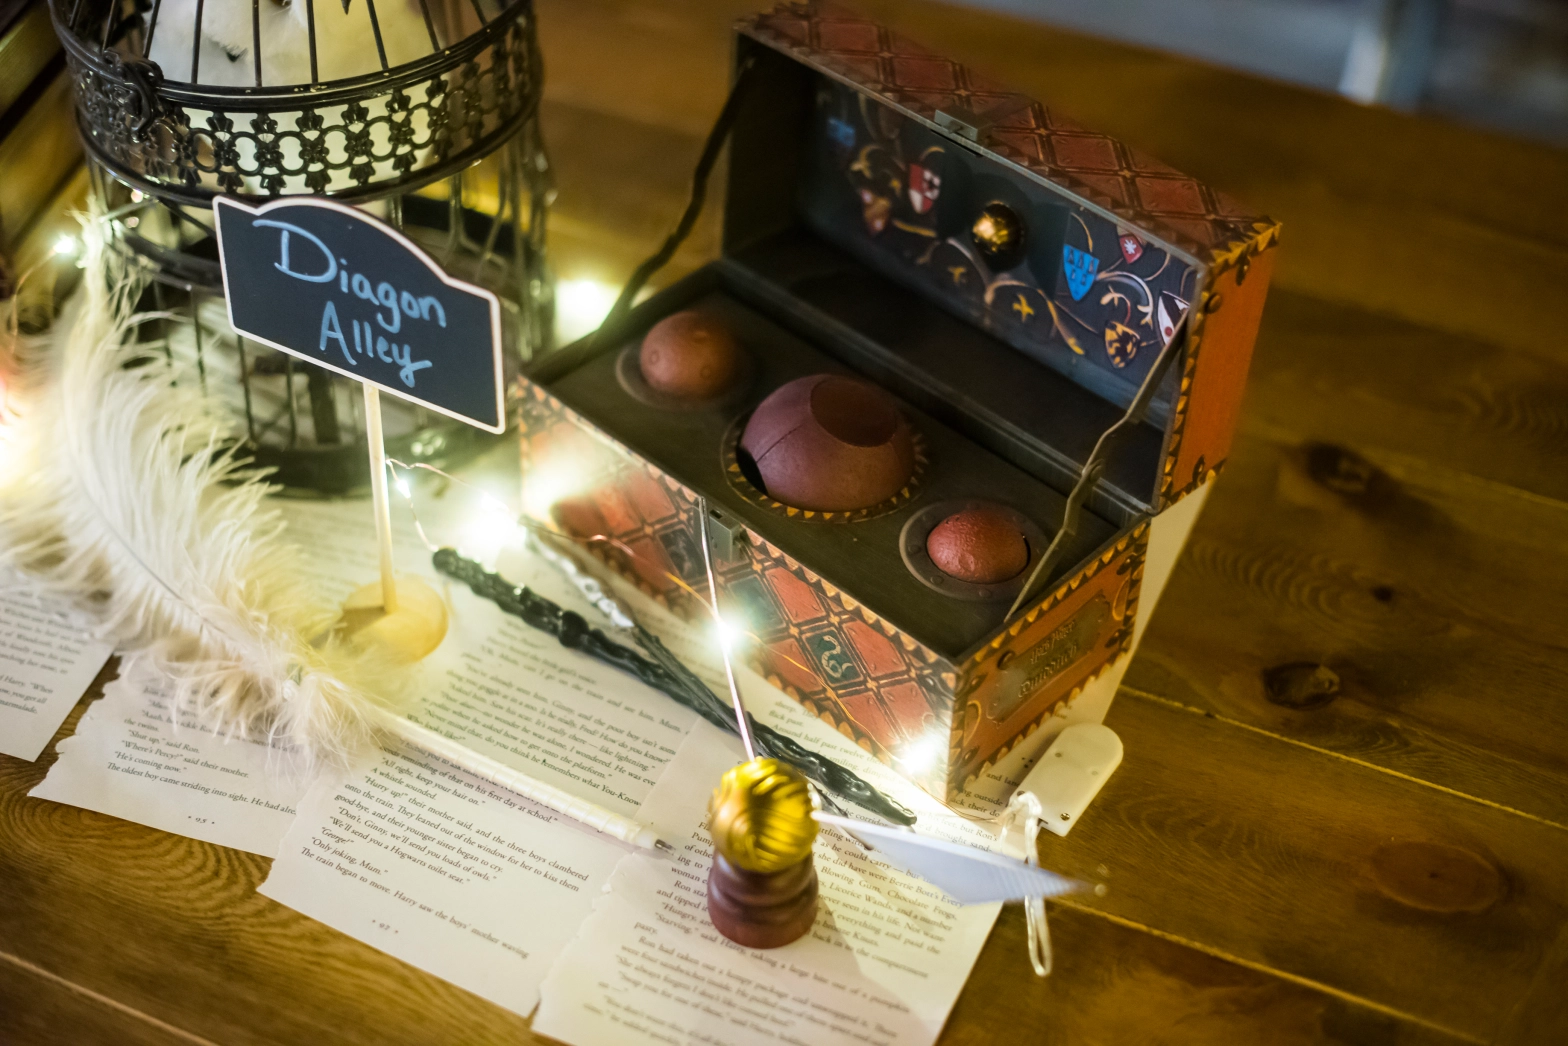 22 Magical Harry Potter Wedding Ideas to Include In Your Big Day